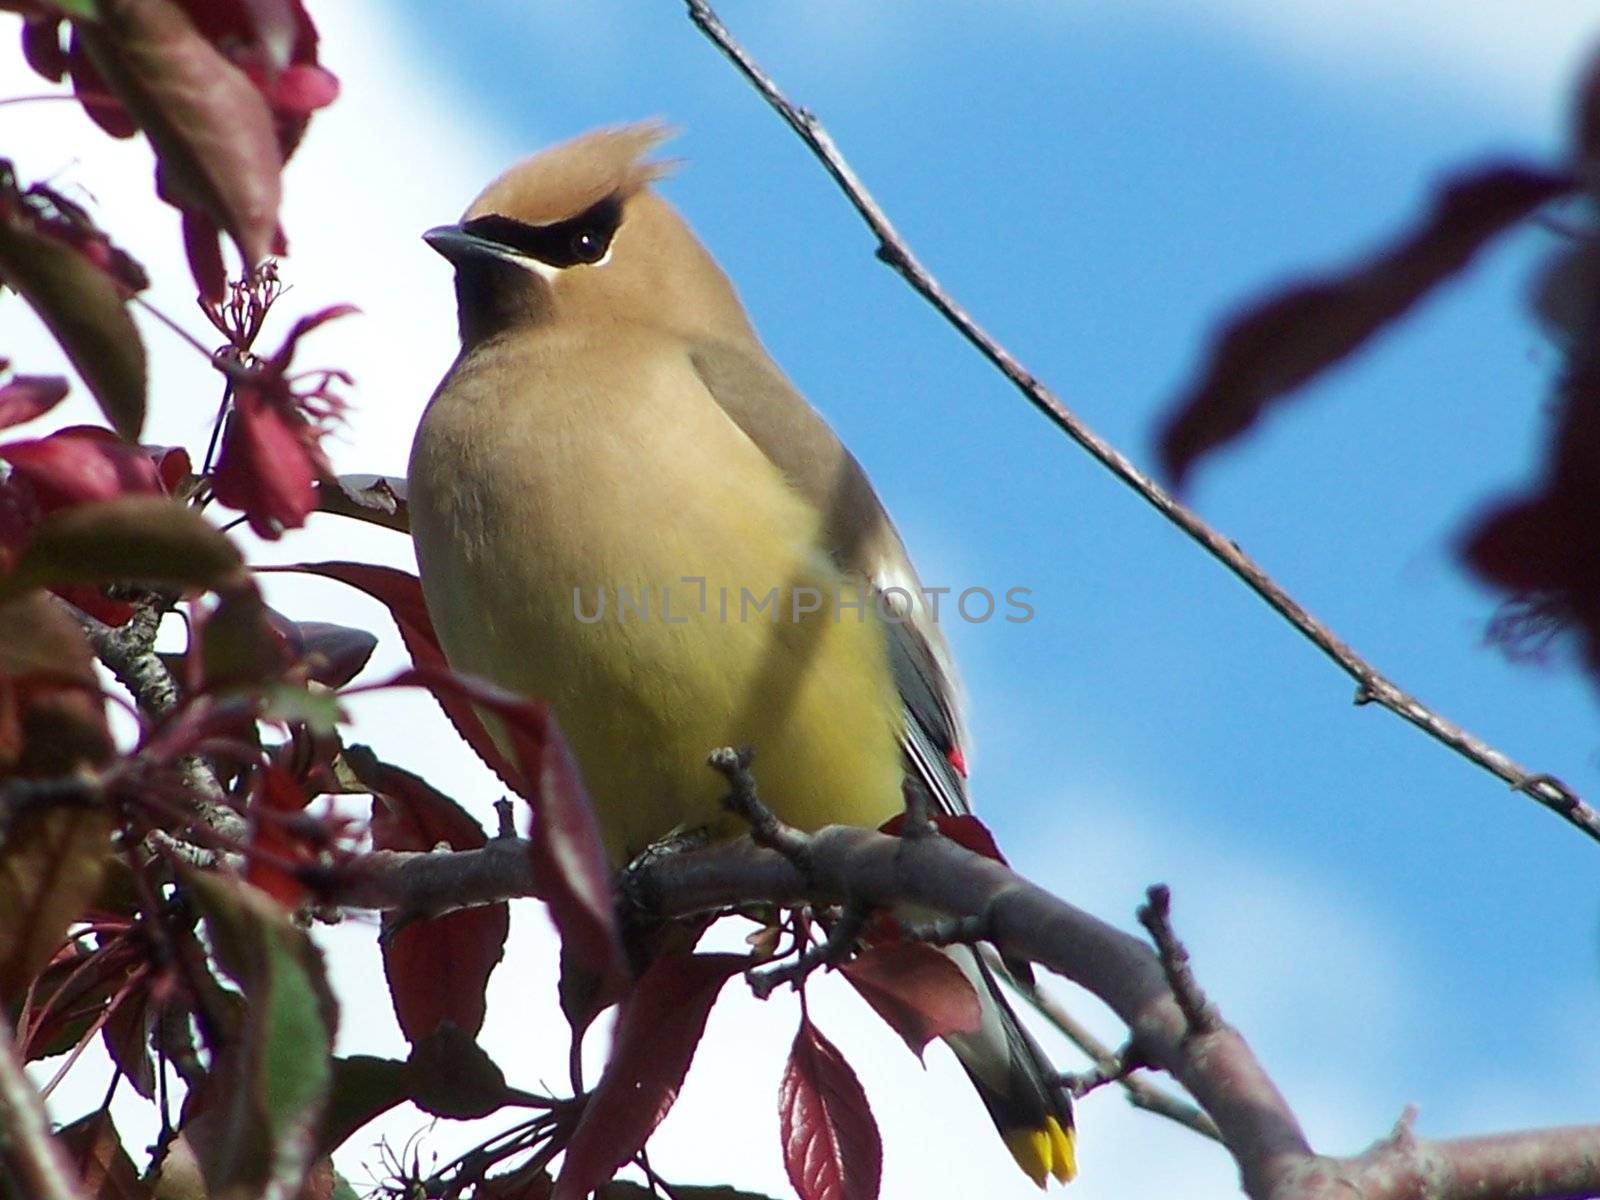 Cedar Waxwing perched on a branch of a fruit tree